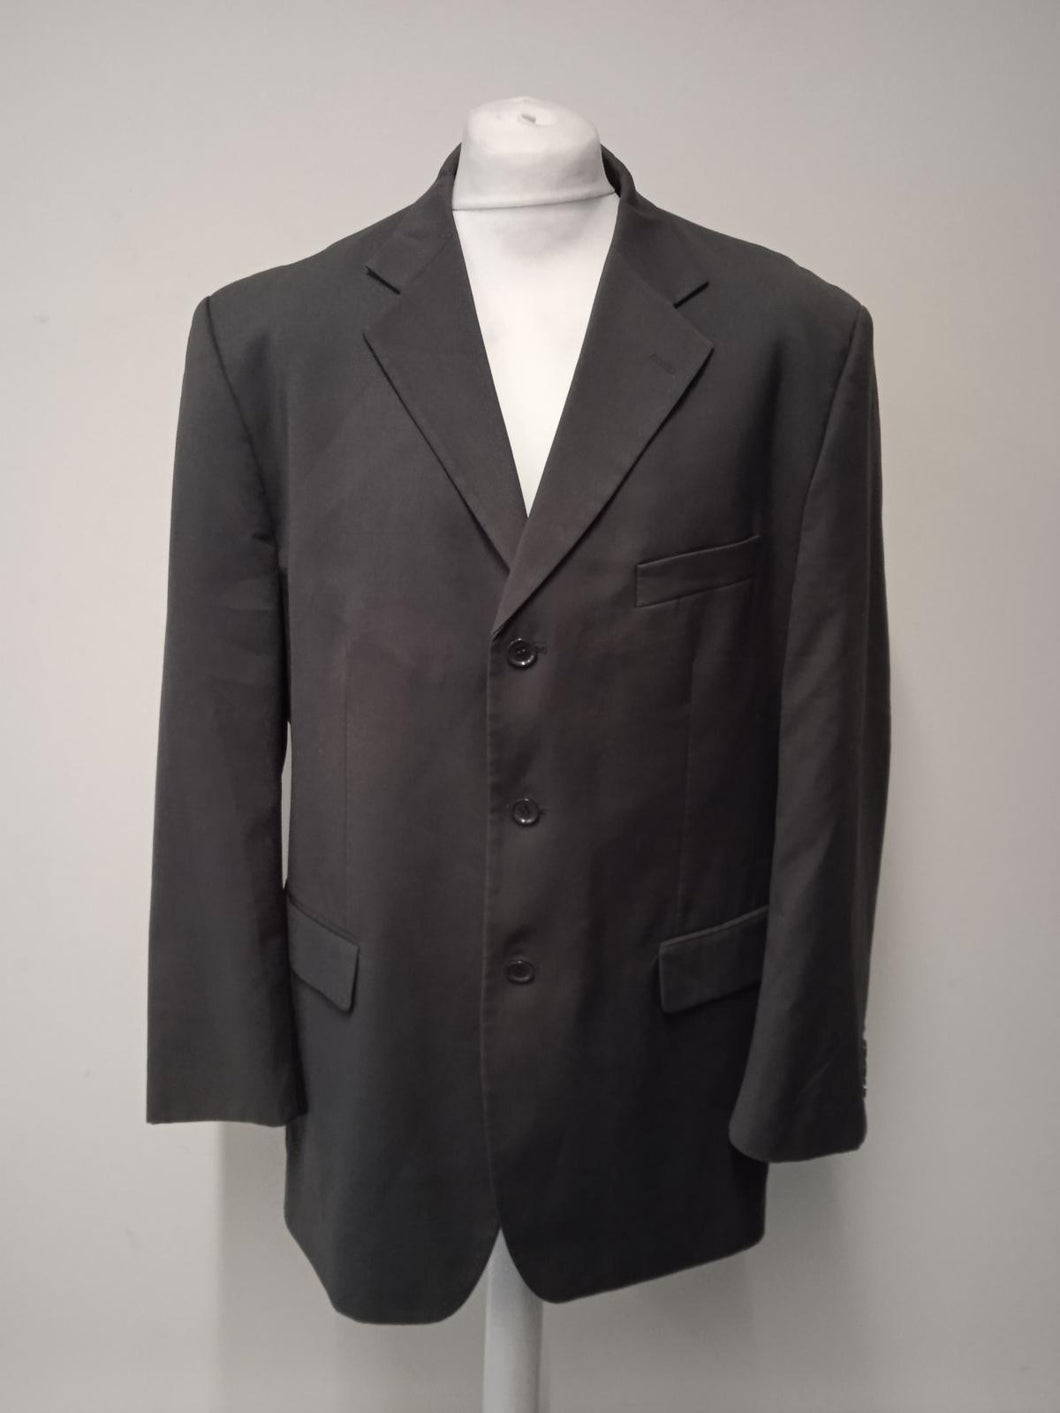 WILLERBY SMITH Men's Grey Long-Sleeve Single Breasted Suit Jacket Size UK46